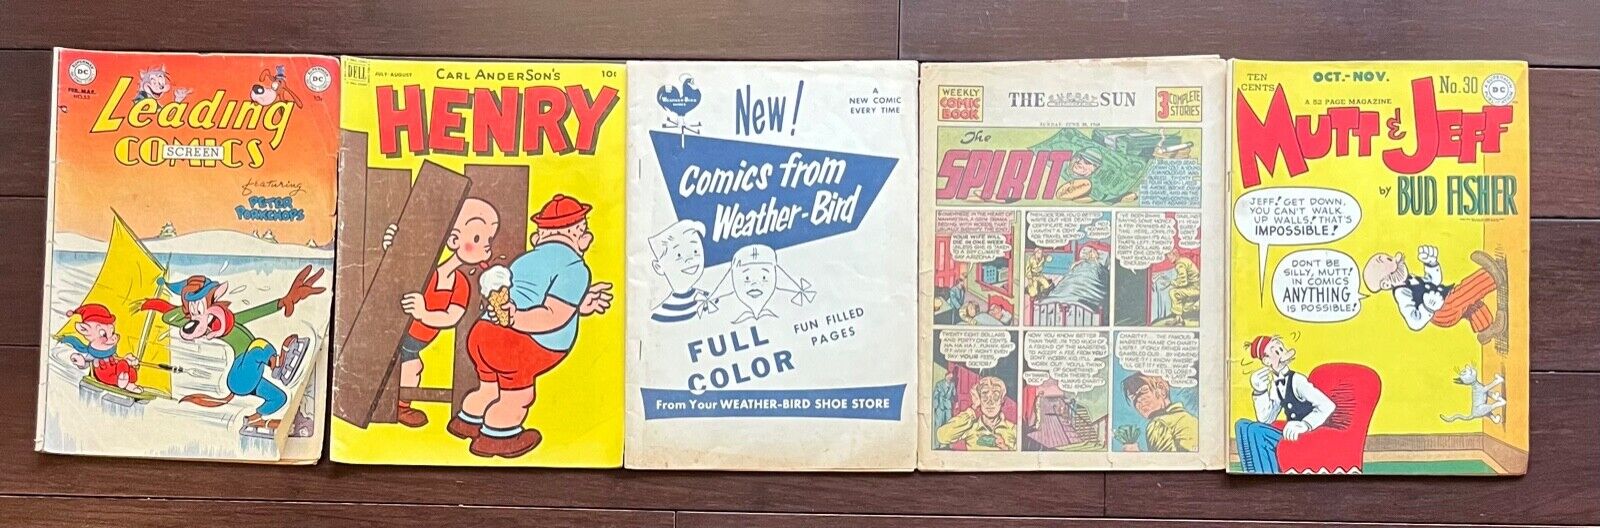 Five 1940's COMIC BOOKS.....LEADING Comics, SPIRIT from 1940!....ONLY $19.95!